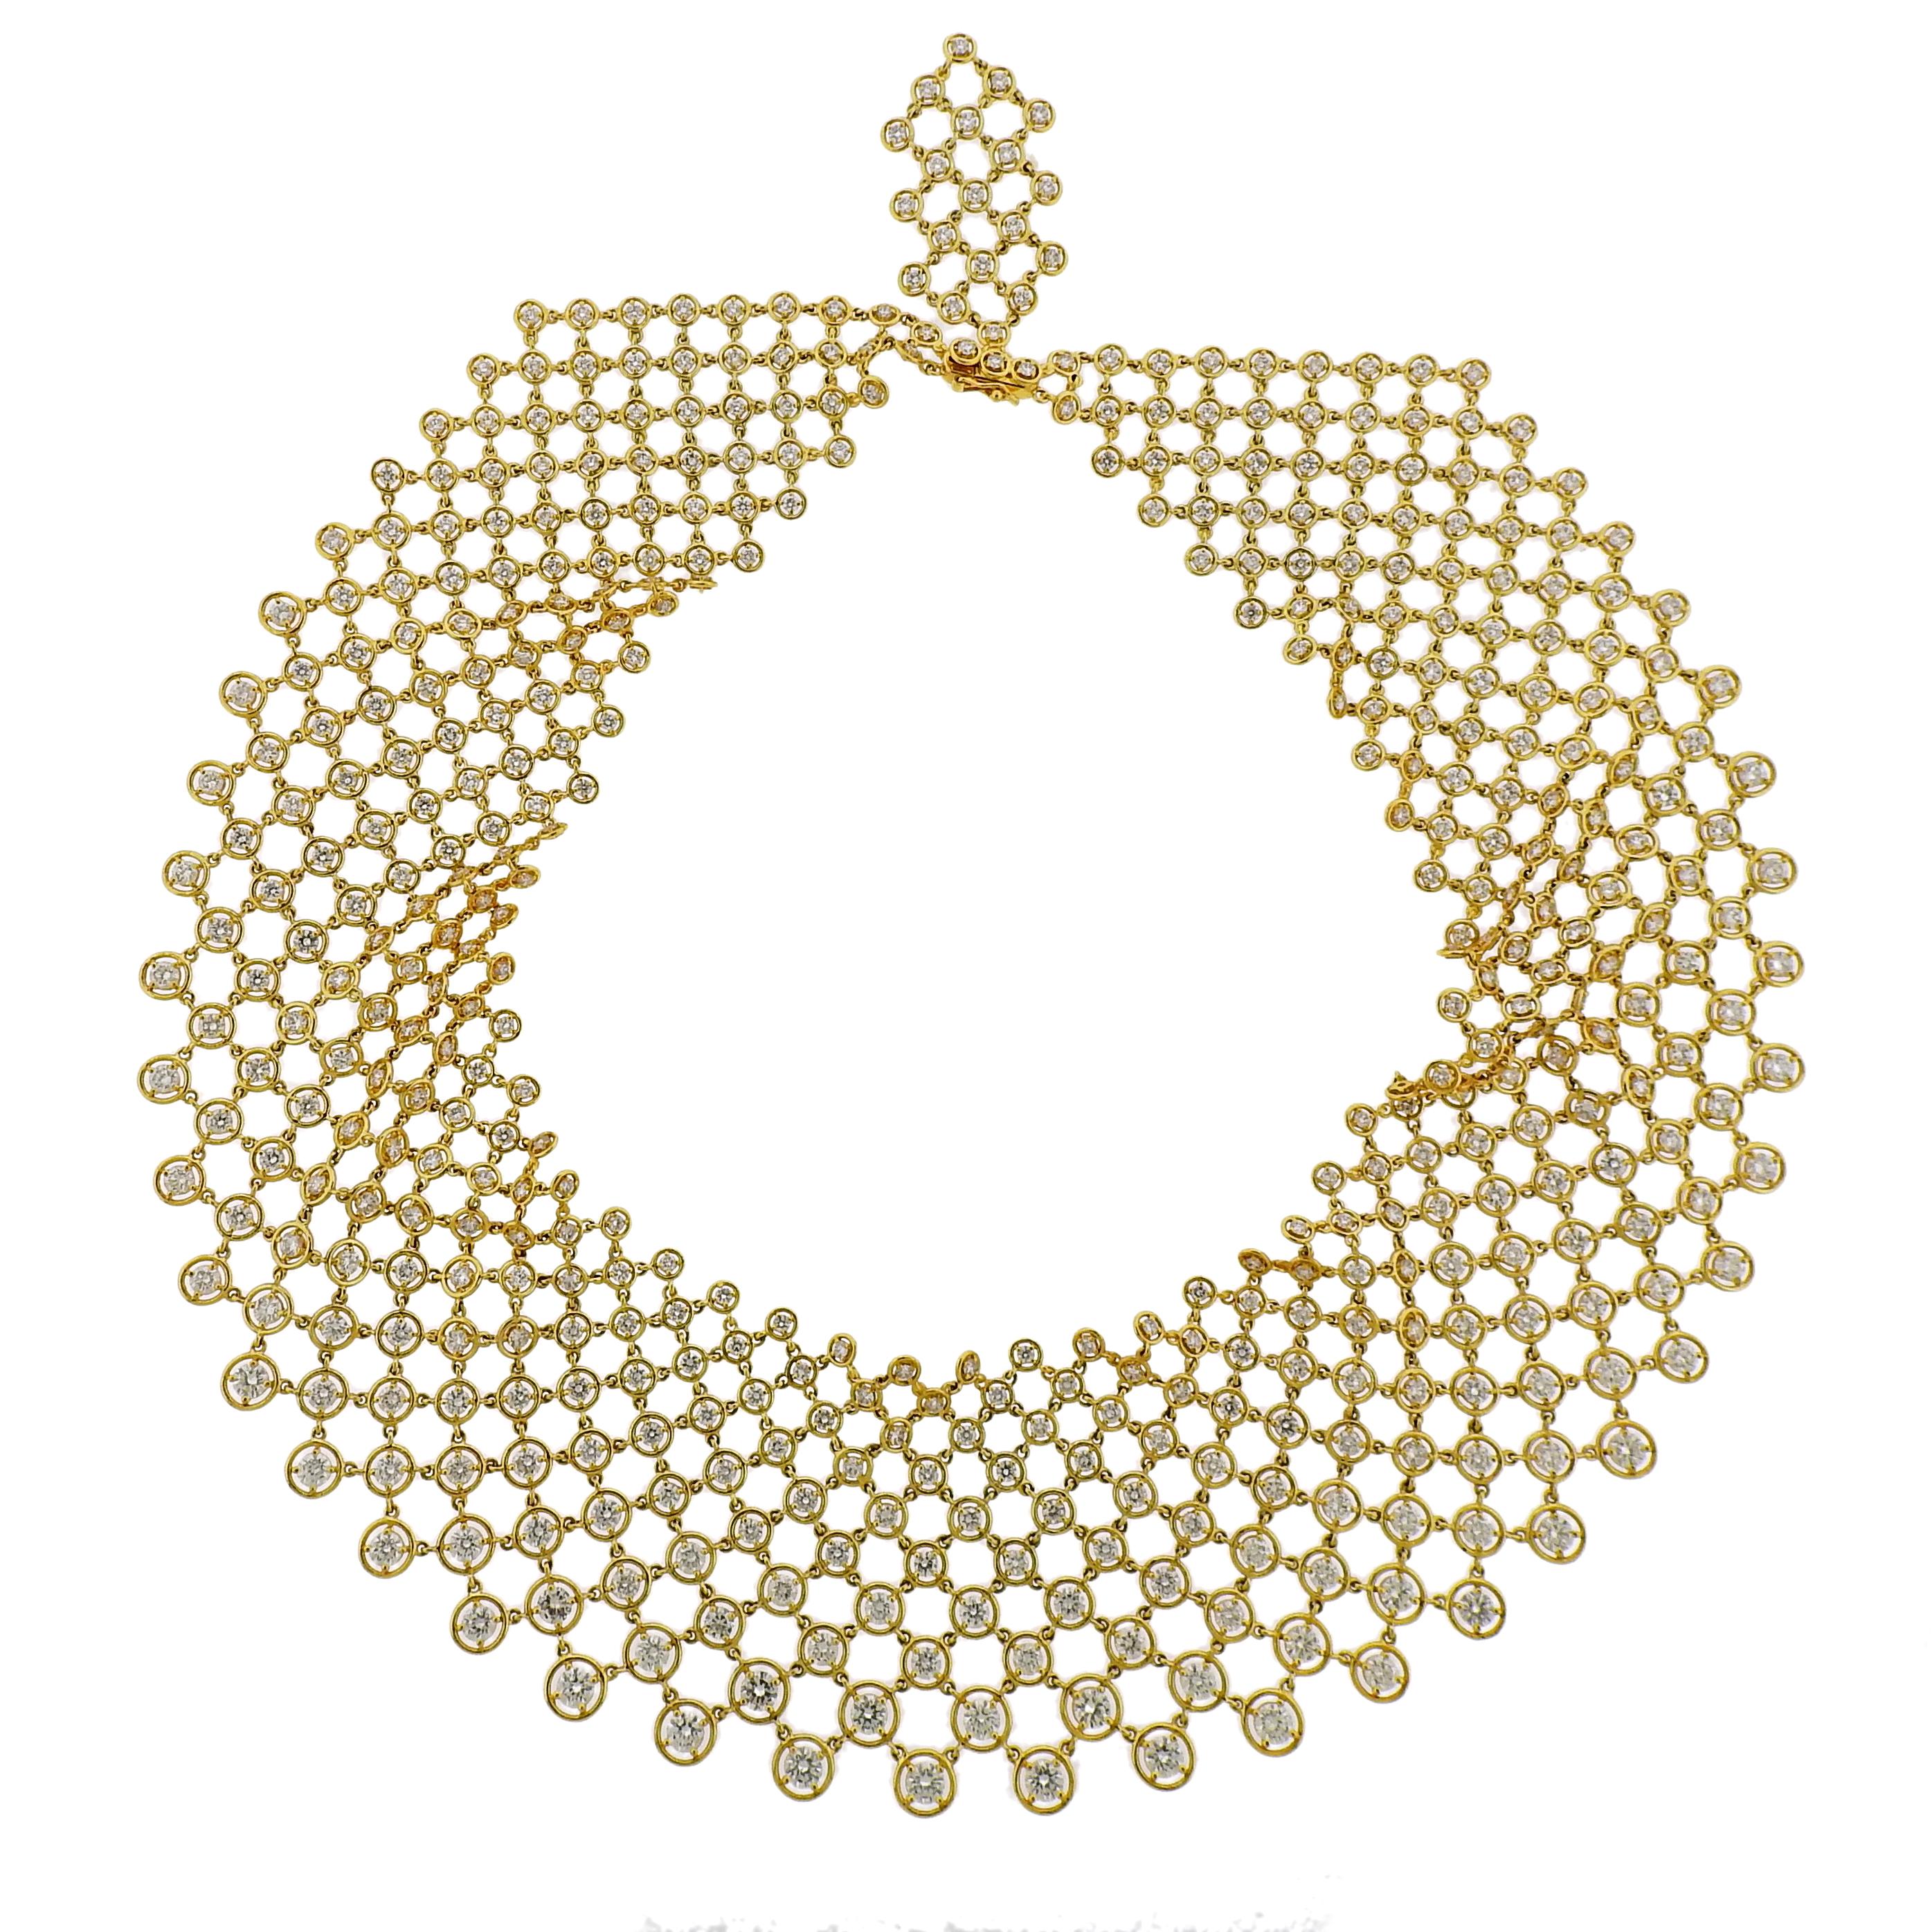 Gold and Diamond Mesh Bib Necklace
18 kt., round diamonds ap. 23.00 cts., with extra link attached, ap. 54.4 dwts/84.5 Gram Length 15 inches. 

Diamonds: G-H-I-VS. 

Well-made. Flexible. Width 1 7/81 to 1 1/2 inches. 

SKU#N-01672